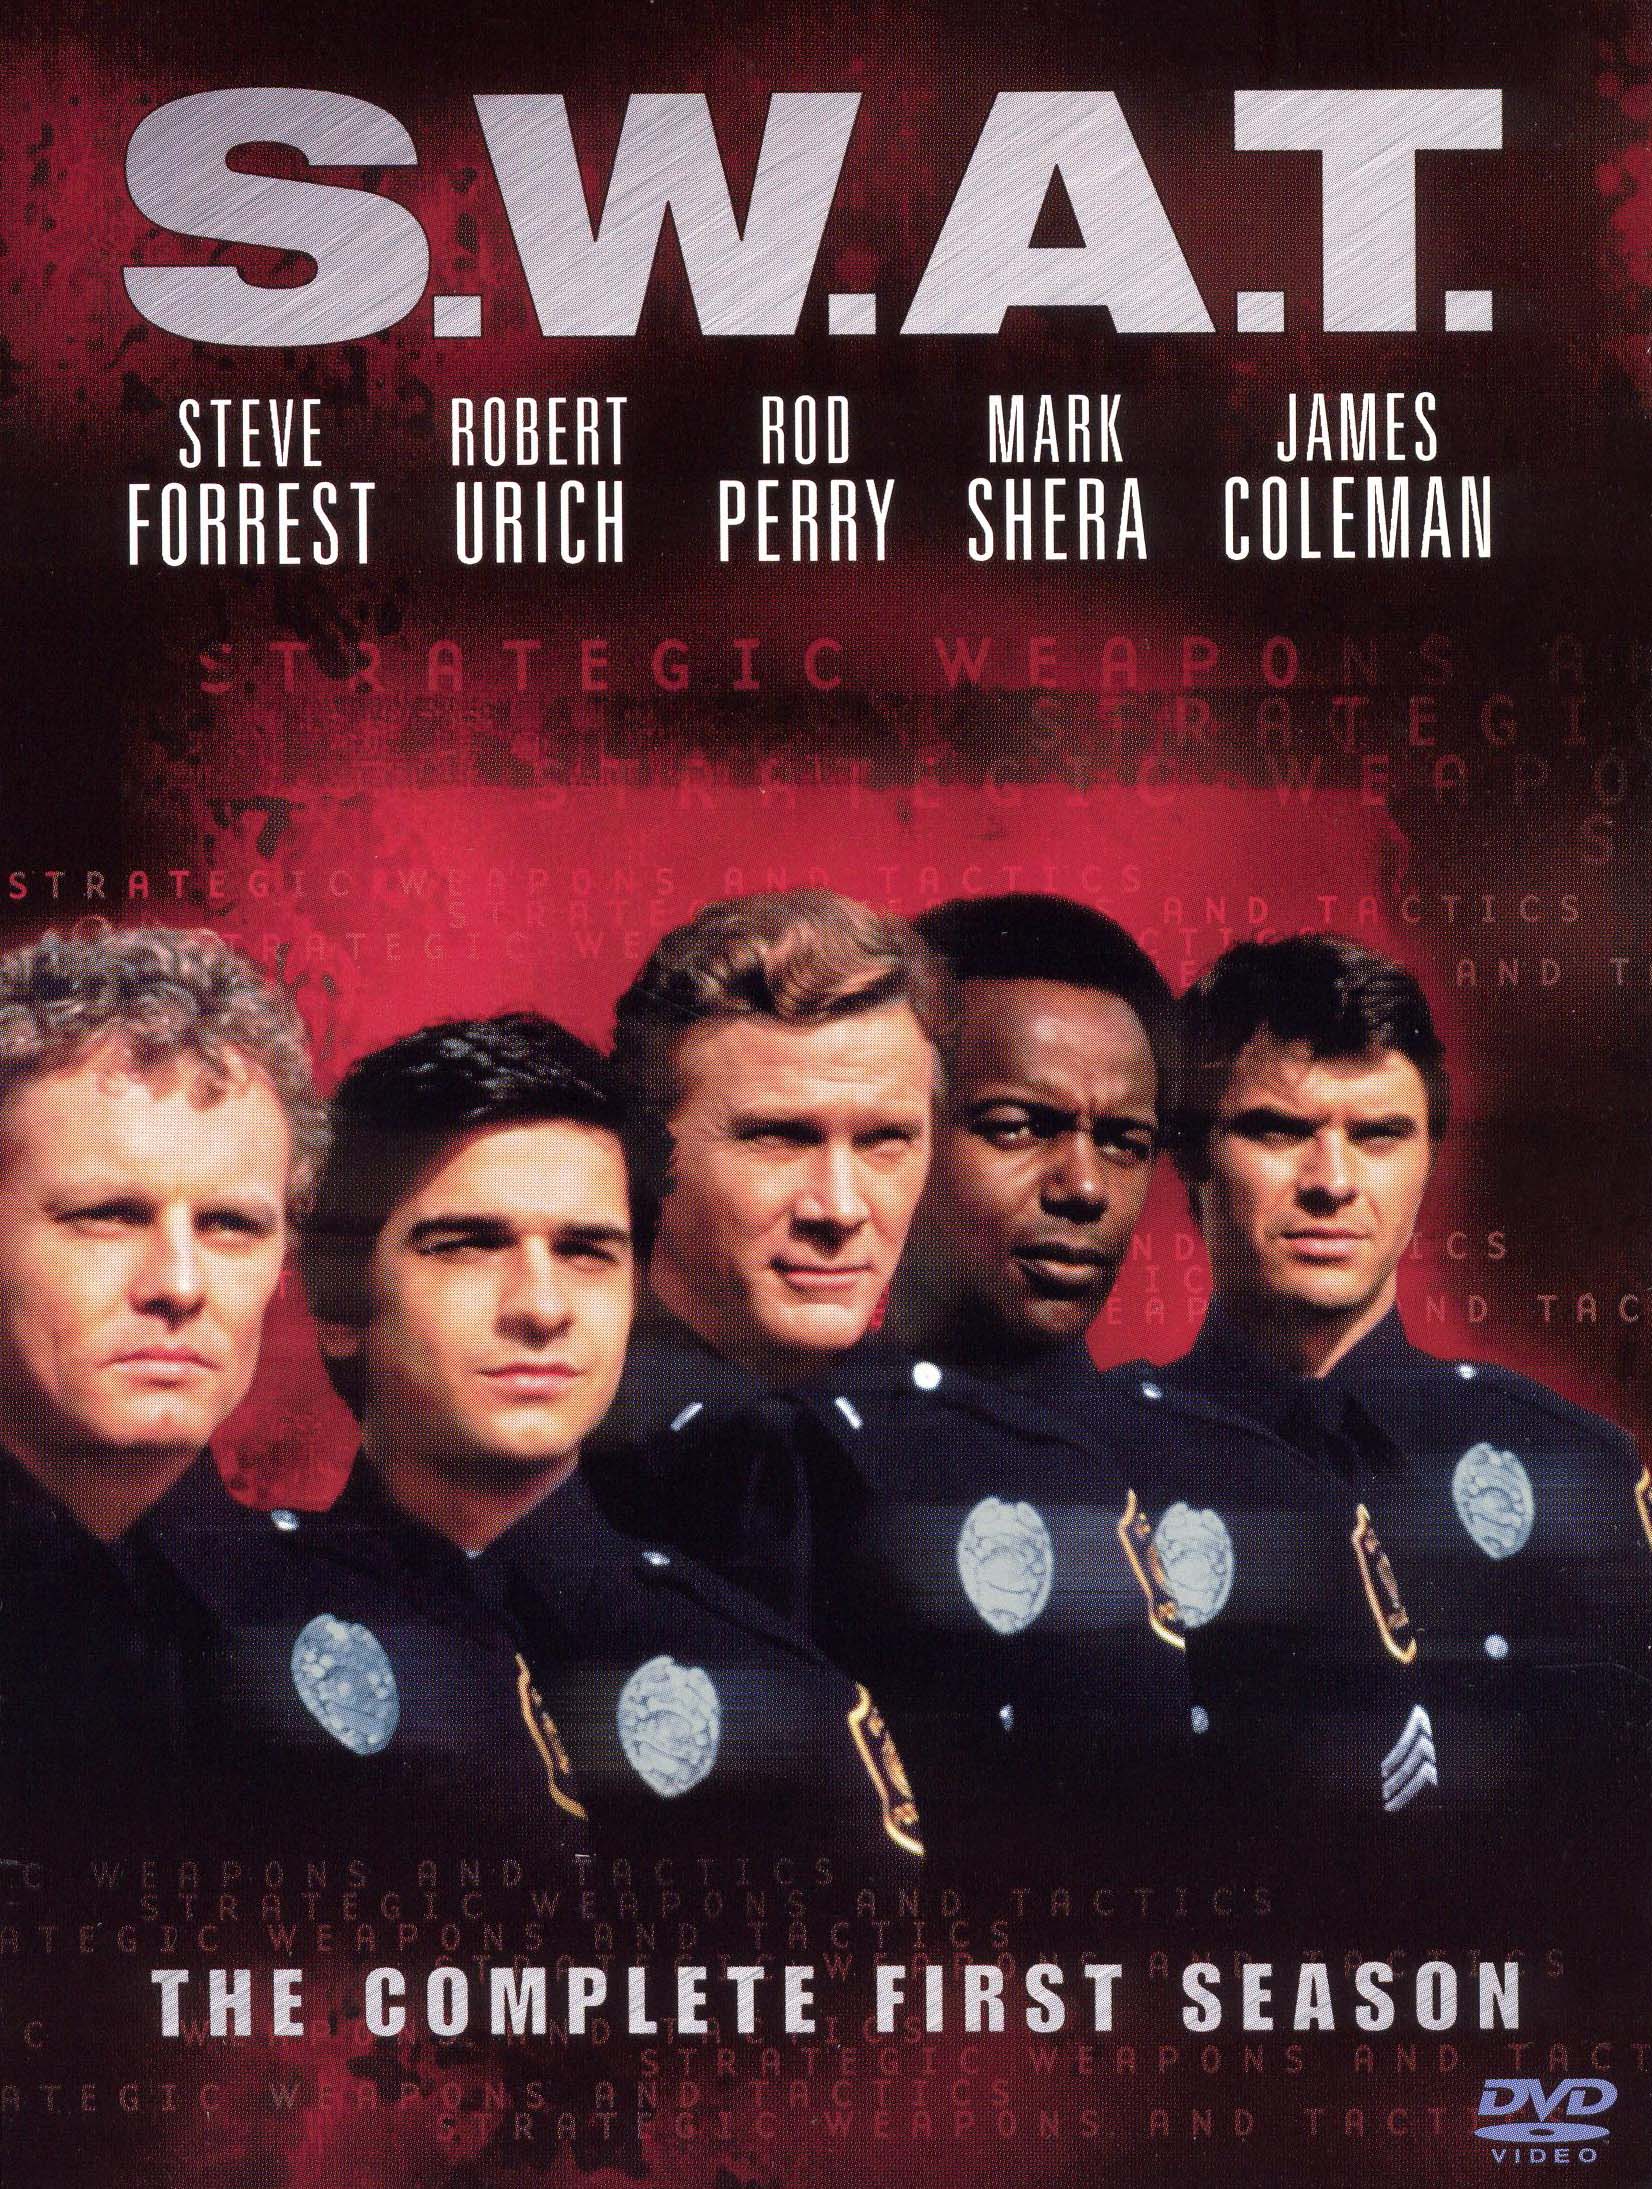 S.W.A.T.: The Complete Series [DVD] - Best Buy